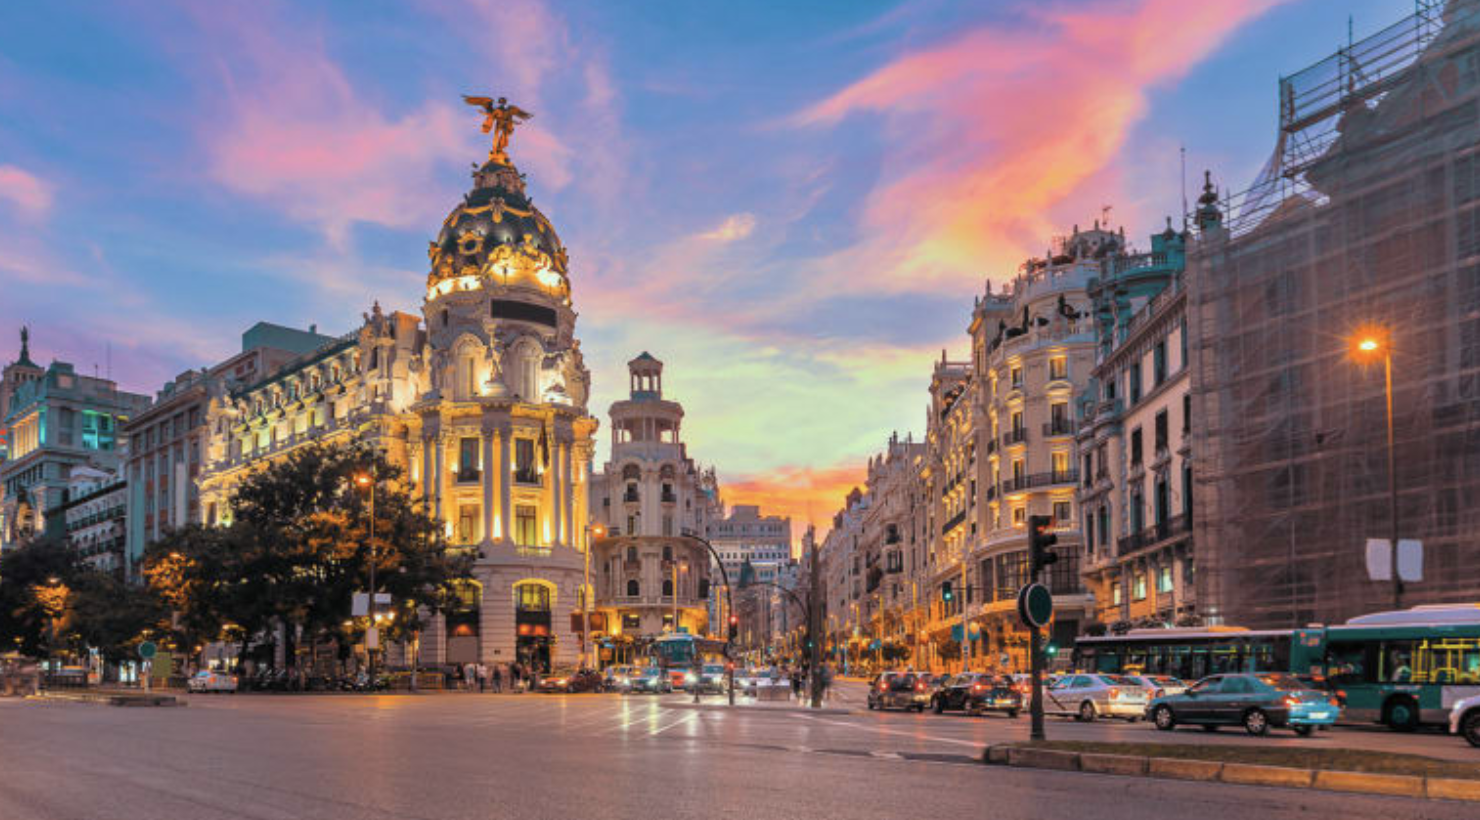 Spain Hoping to Resume Tourism by Spring 2021